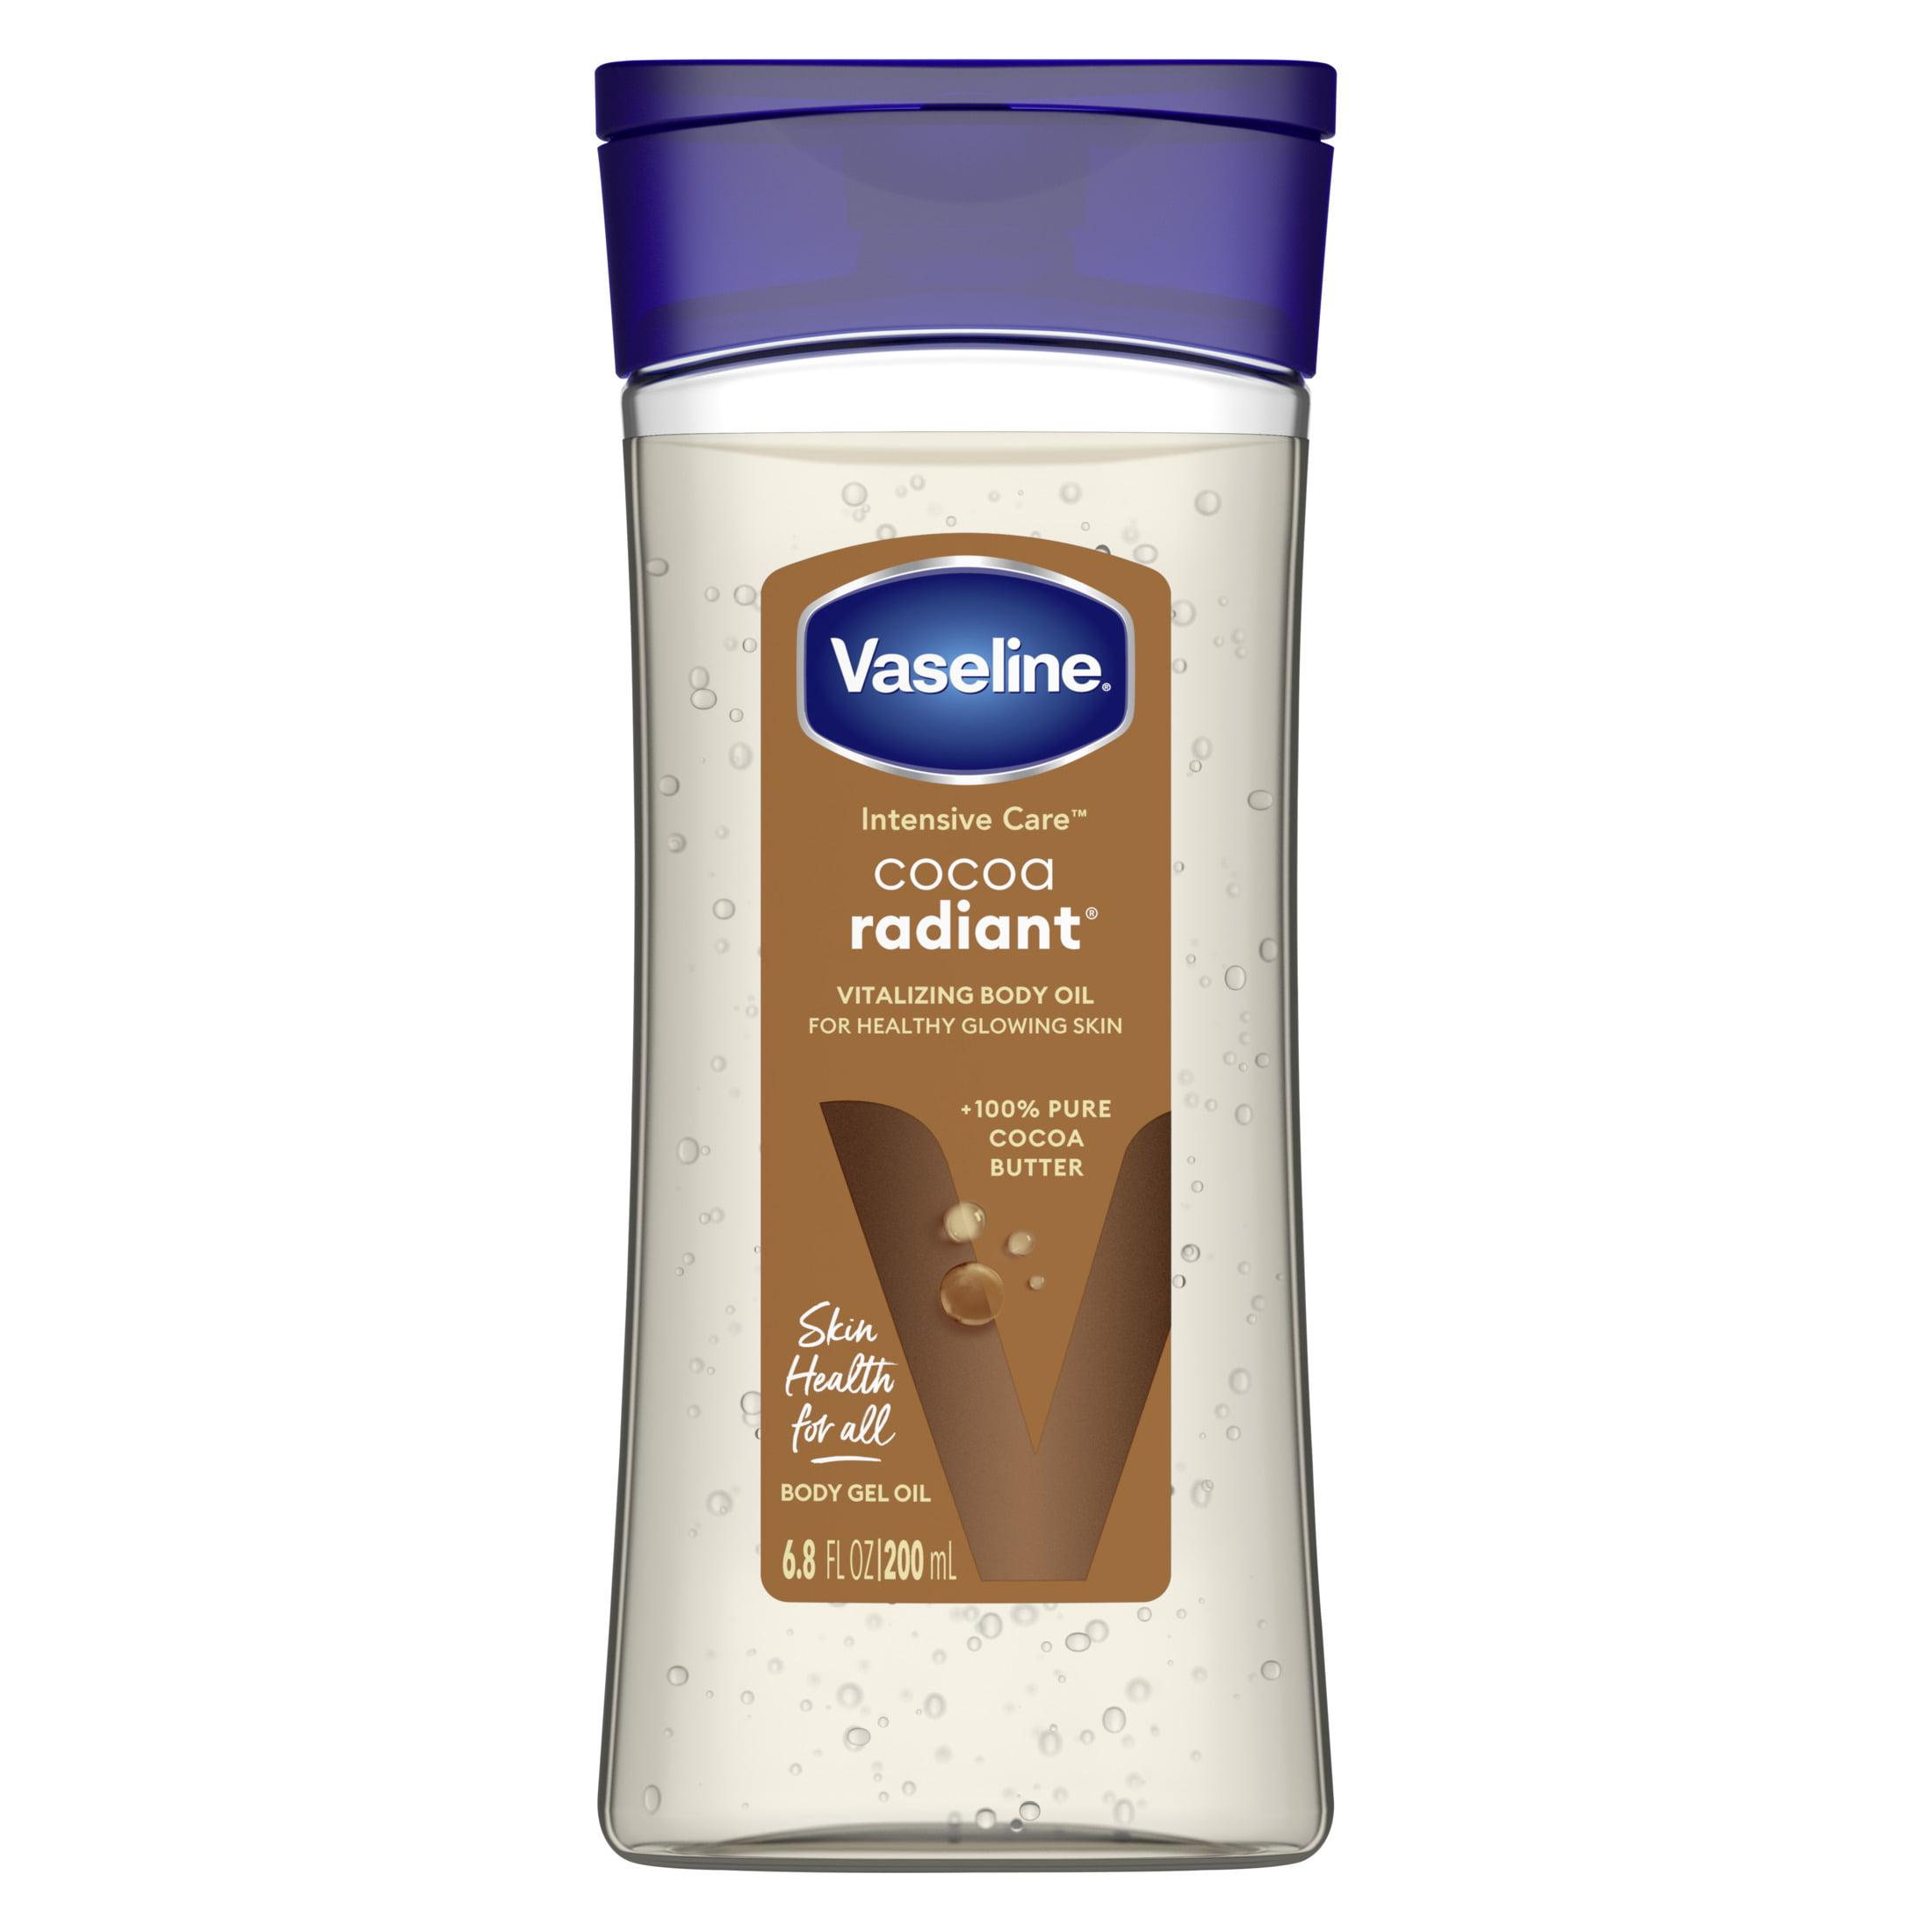 Vaseline Intensive Care Radiant Body Oil Gel with Cocoa Butter for Dry Skin, 6.8 fl oz - image 1 of 11